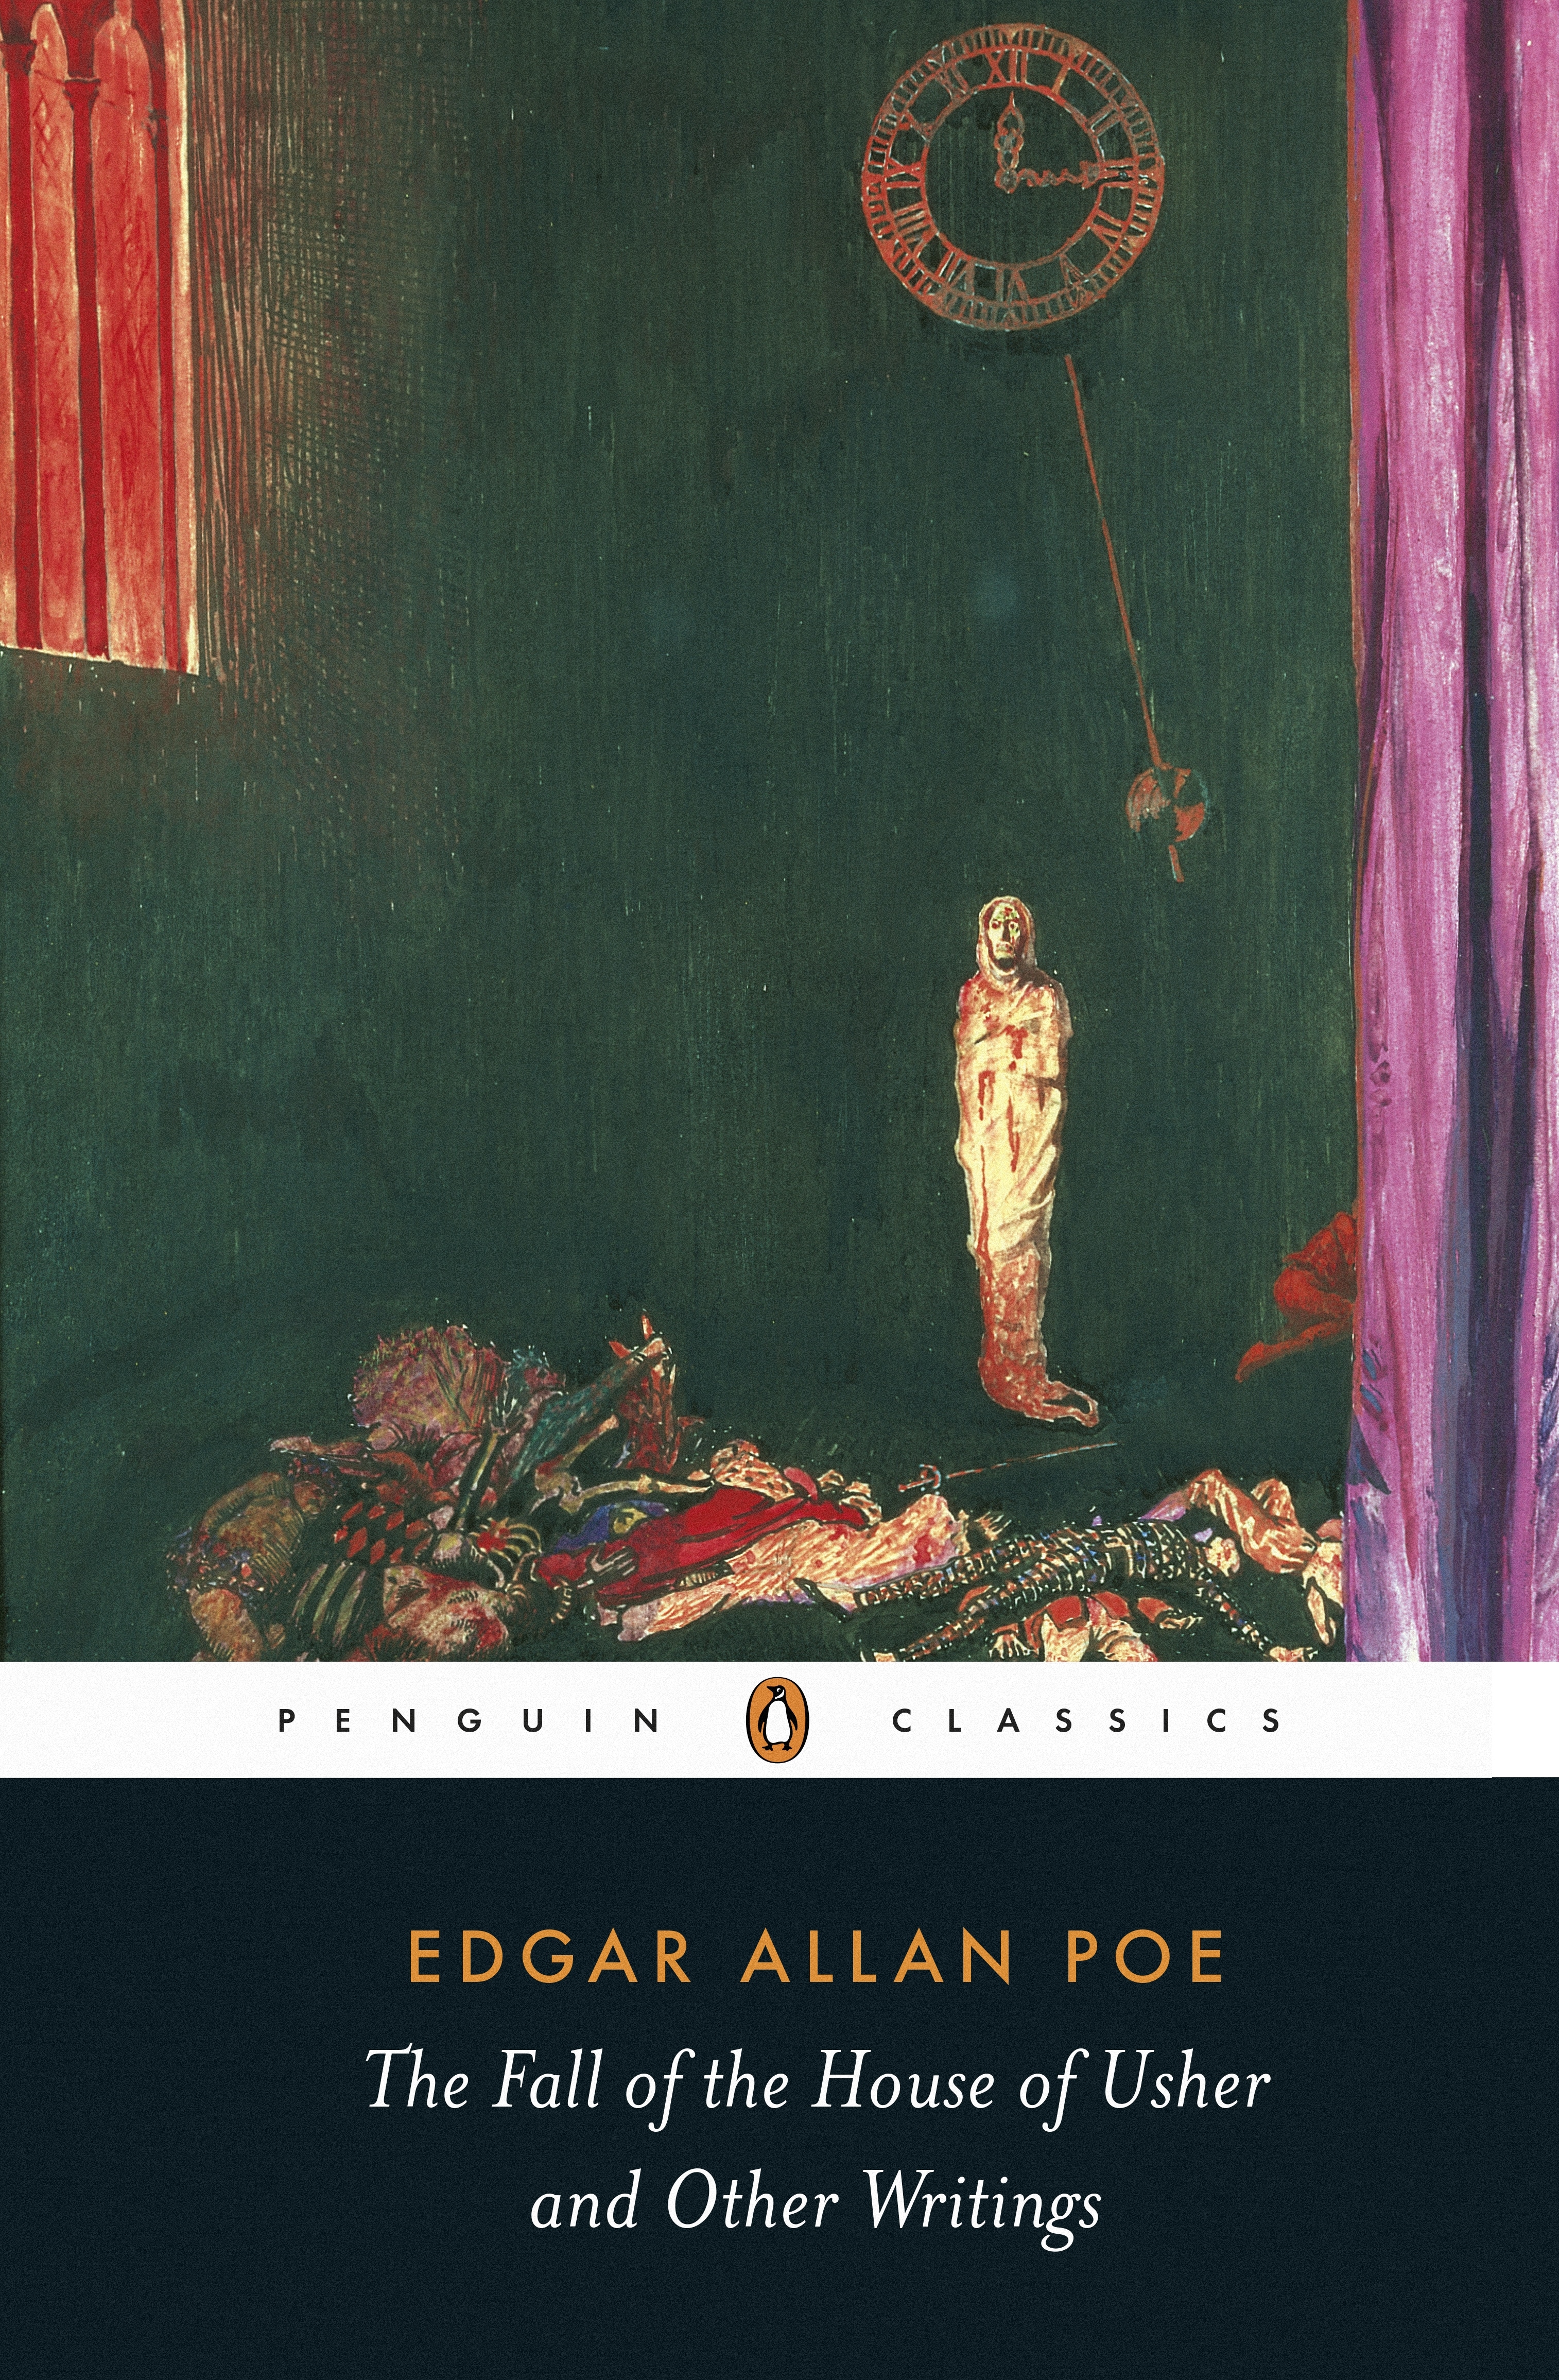 Book “The Fall of the House of Usher and Other Writings” by Edgar Allan Poe — March 27, 2003